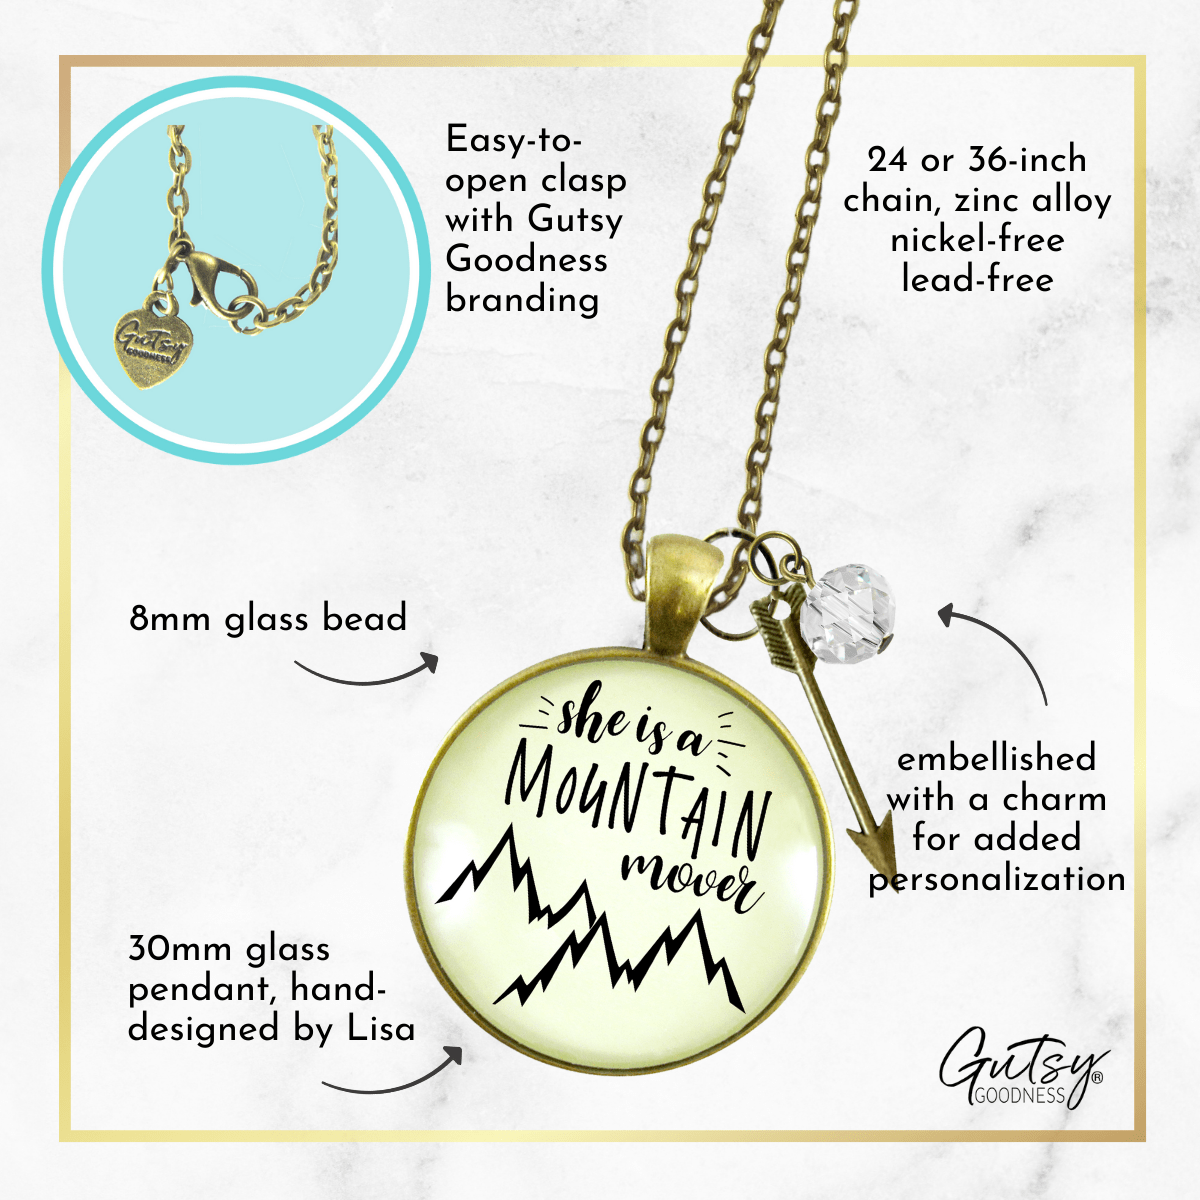 Gutsy Goodness She is a Mountain Mover Necklace Motivated Life Attitude Jewelry - Gutsy Goodness Handmade Jewelry;She Is A Mountain Mover Necklace Motivated Life Attitude Jewelry - Gutsy Goodness Handmade Jewelry Gifts